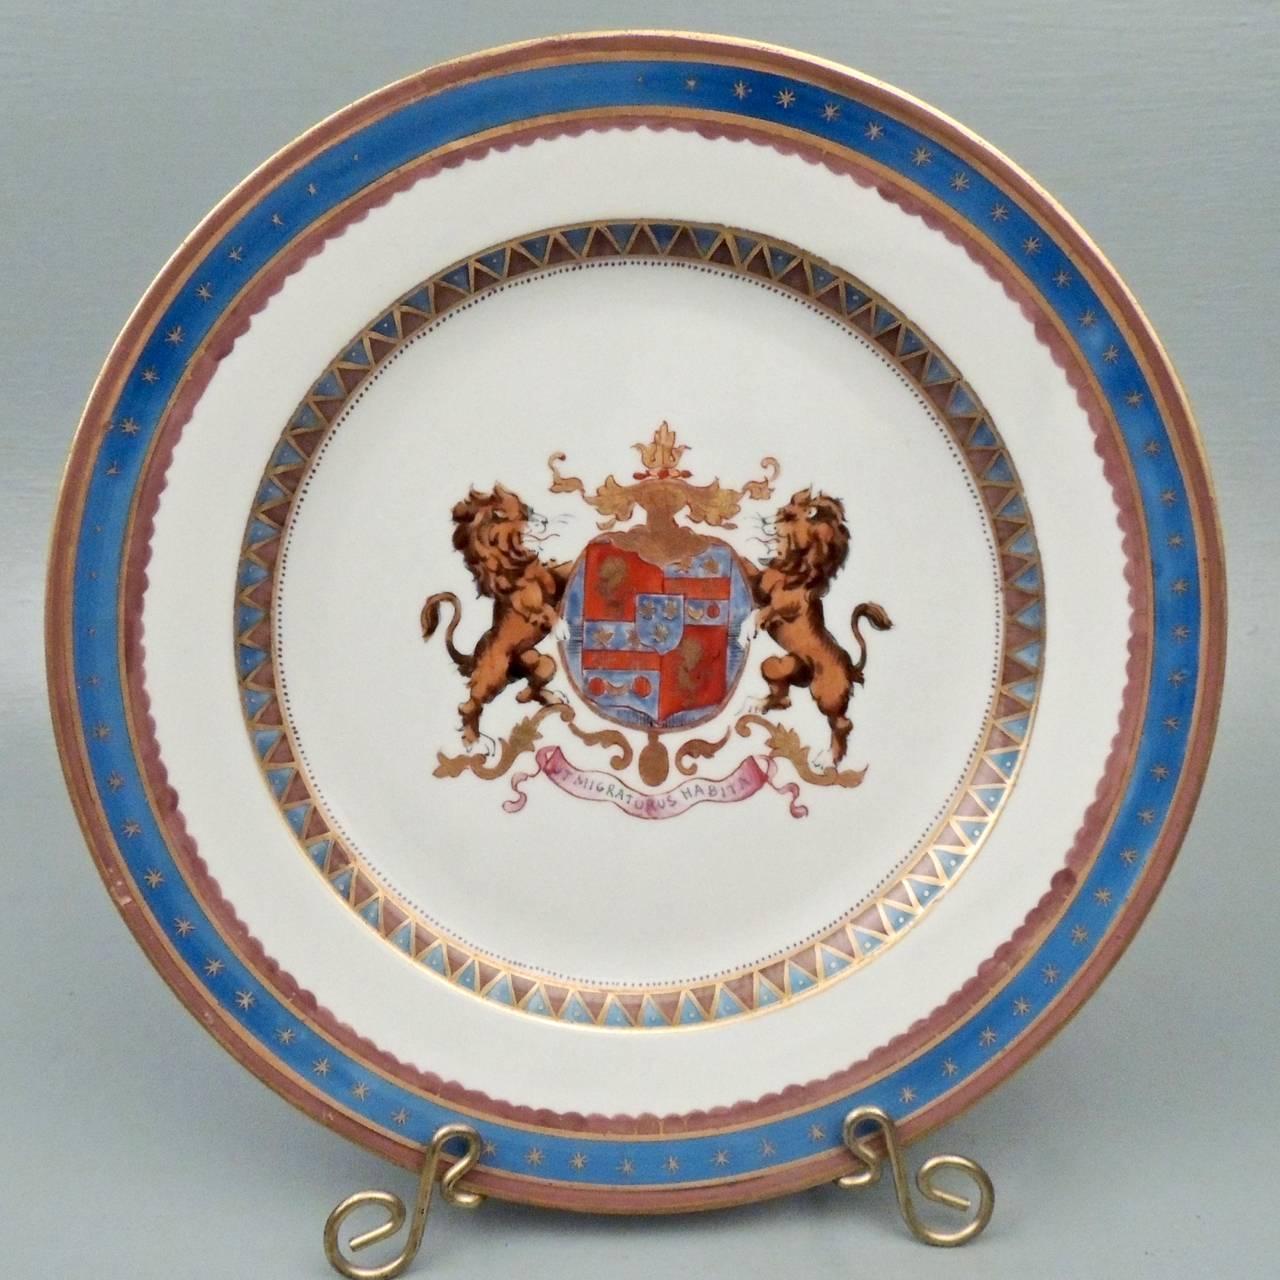 A very good pair of Samson faux armorial porcelain plates. 

With dragons flanking a shield device. Border decorated in a blue and light purple-brown with gold highlights. 

Samson et Cie was founded in the 1830s and quickly began producing